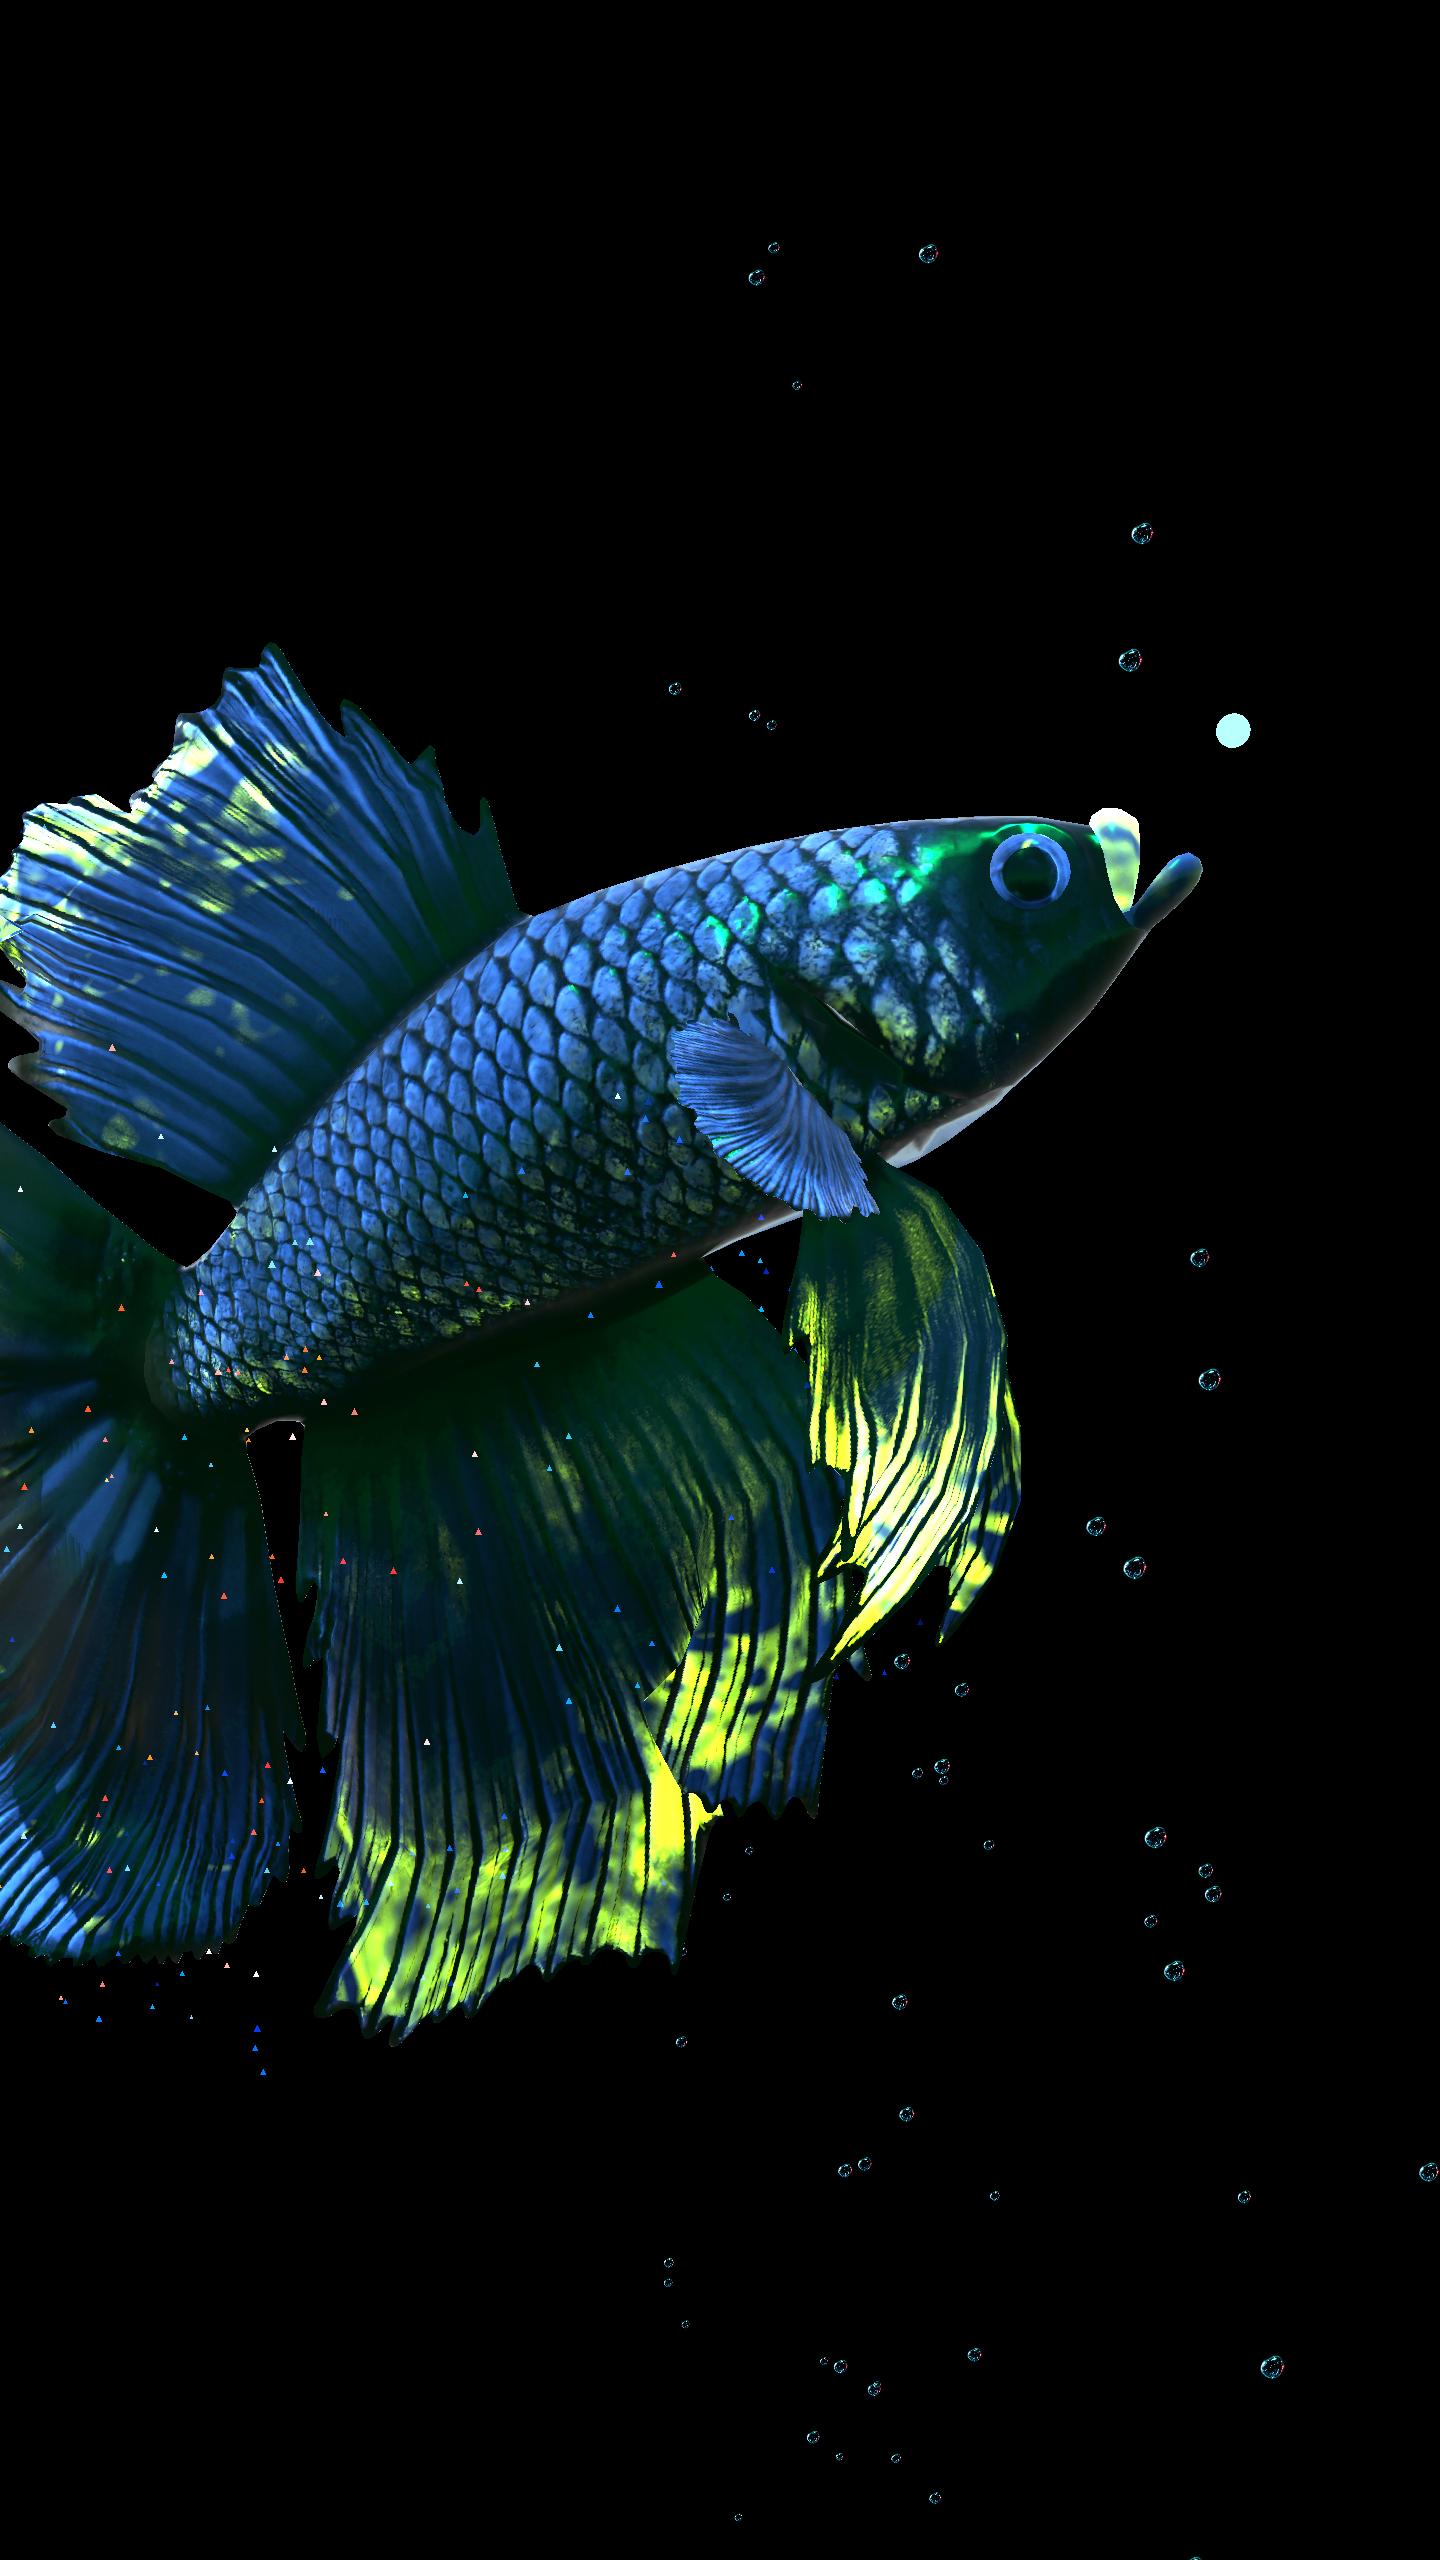 Betta Fish Live Wallpaper FREE for Android - APK Download